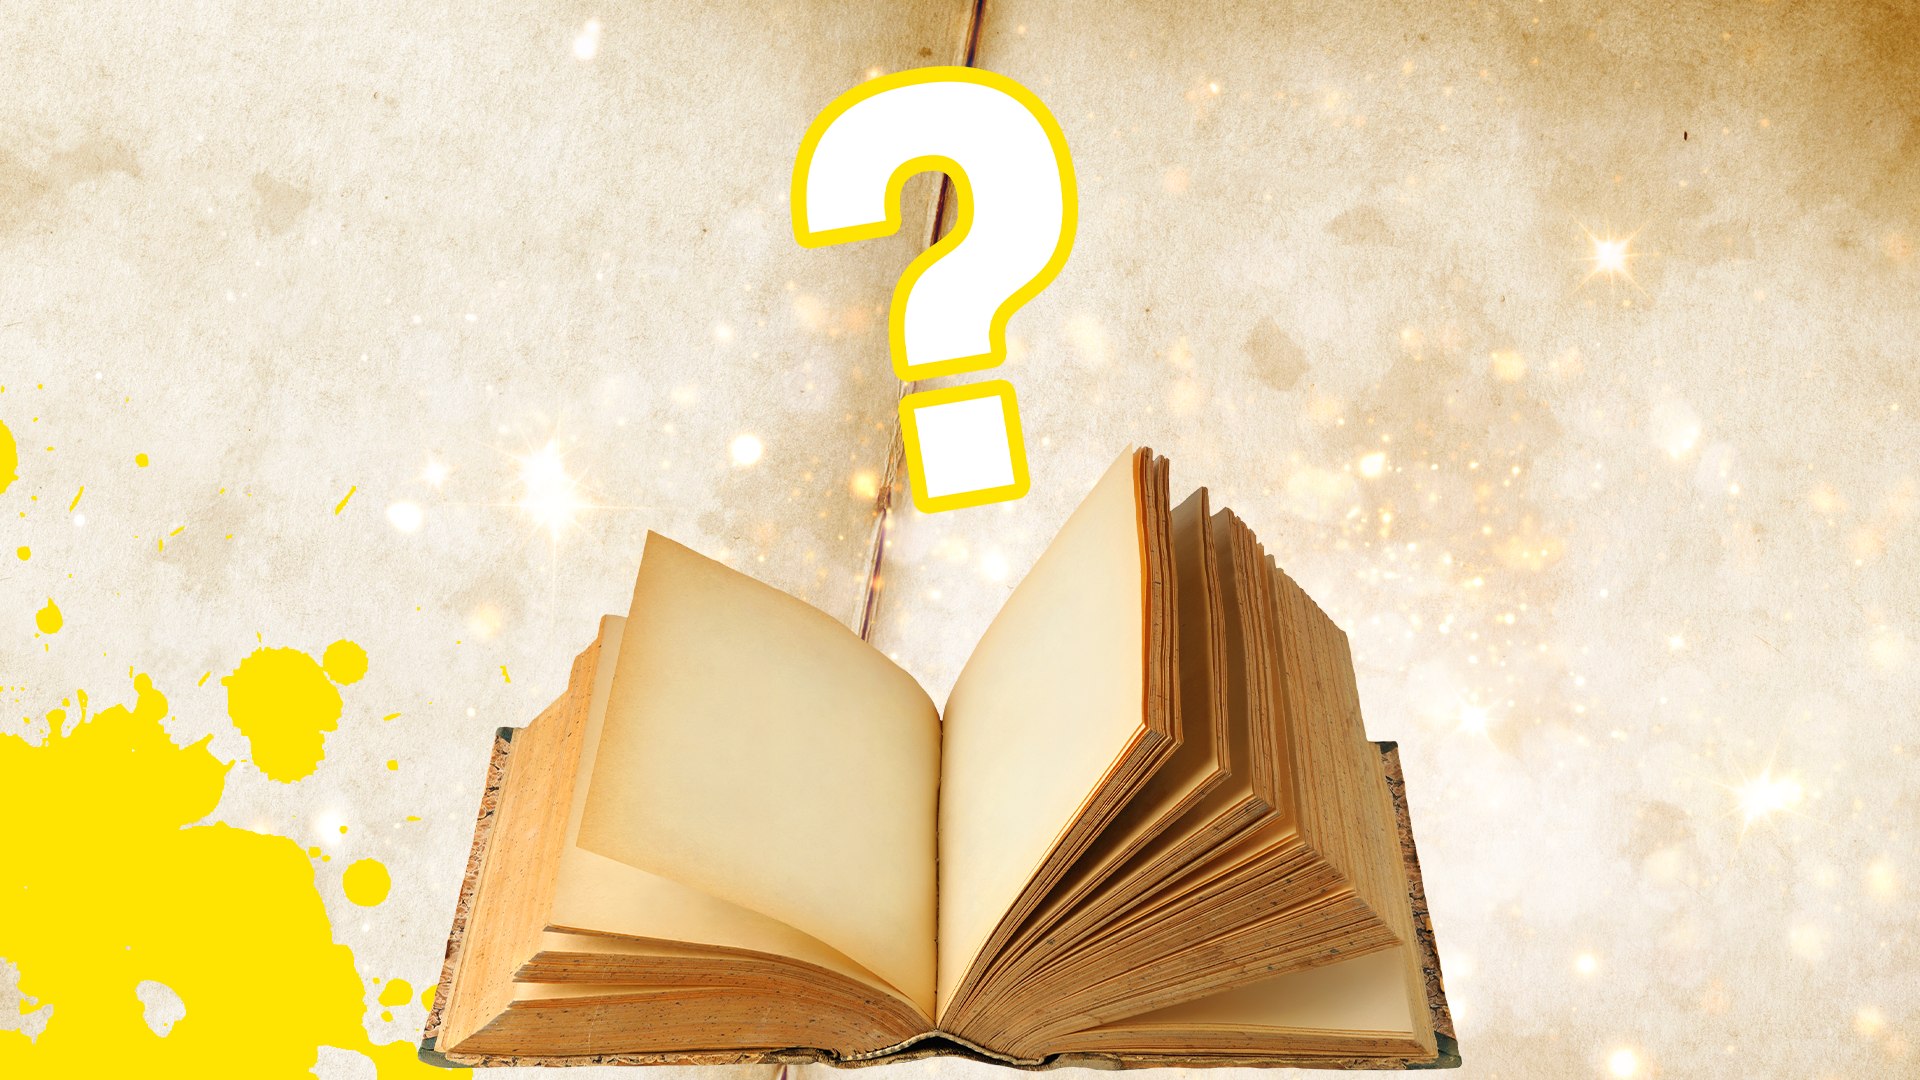 Open book with yellow splat and question mark on paper background